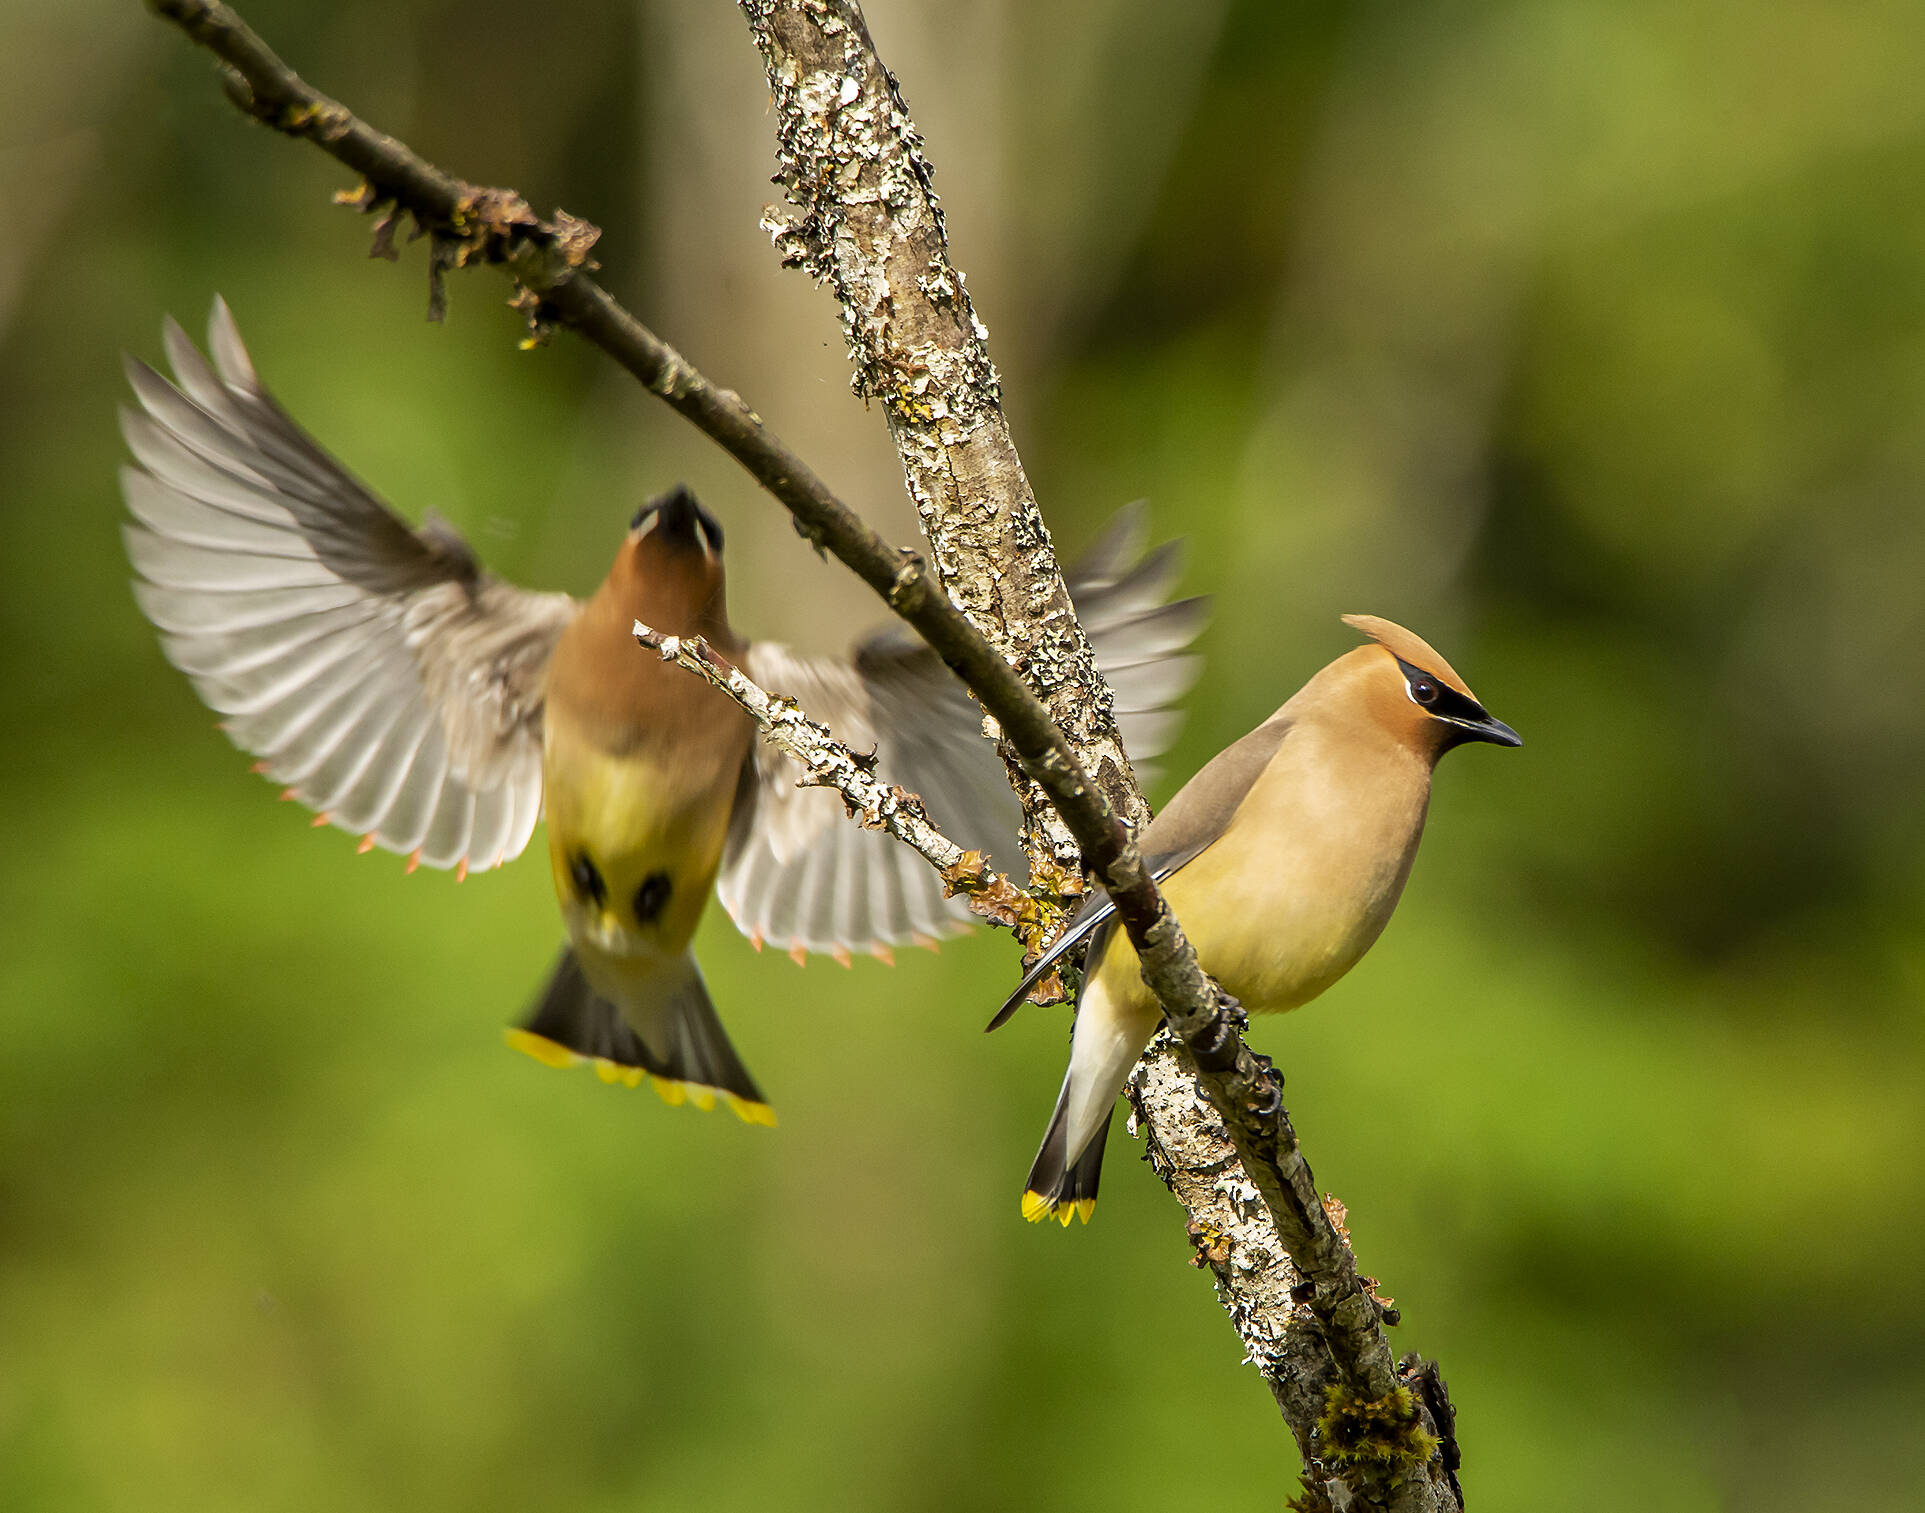 Cedar Waxwings are birds commonly found in Flaming Geyser Park. Photo courtesy of Jay Galvin.